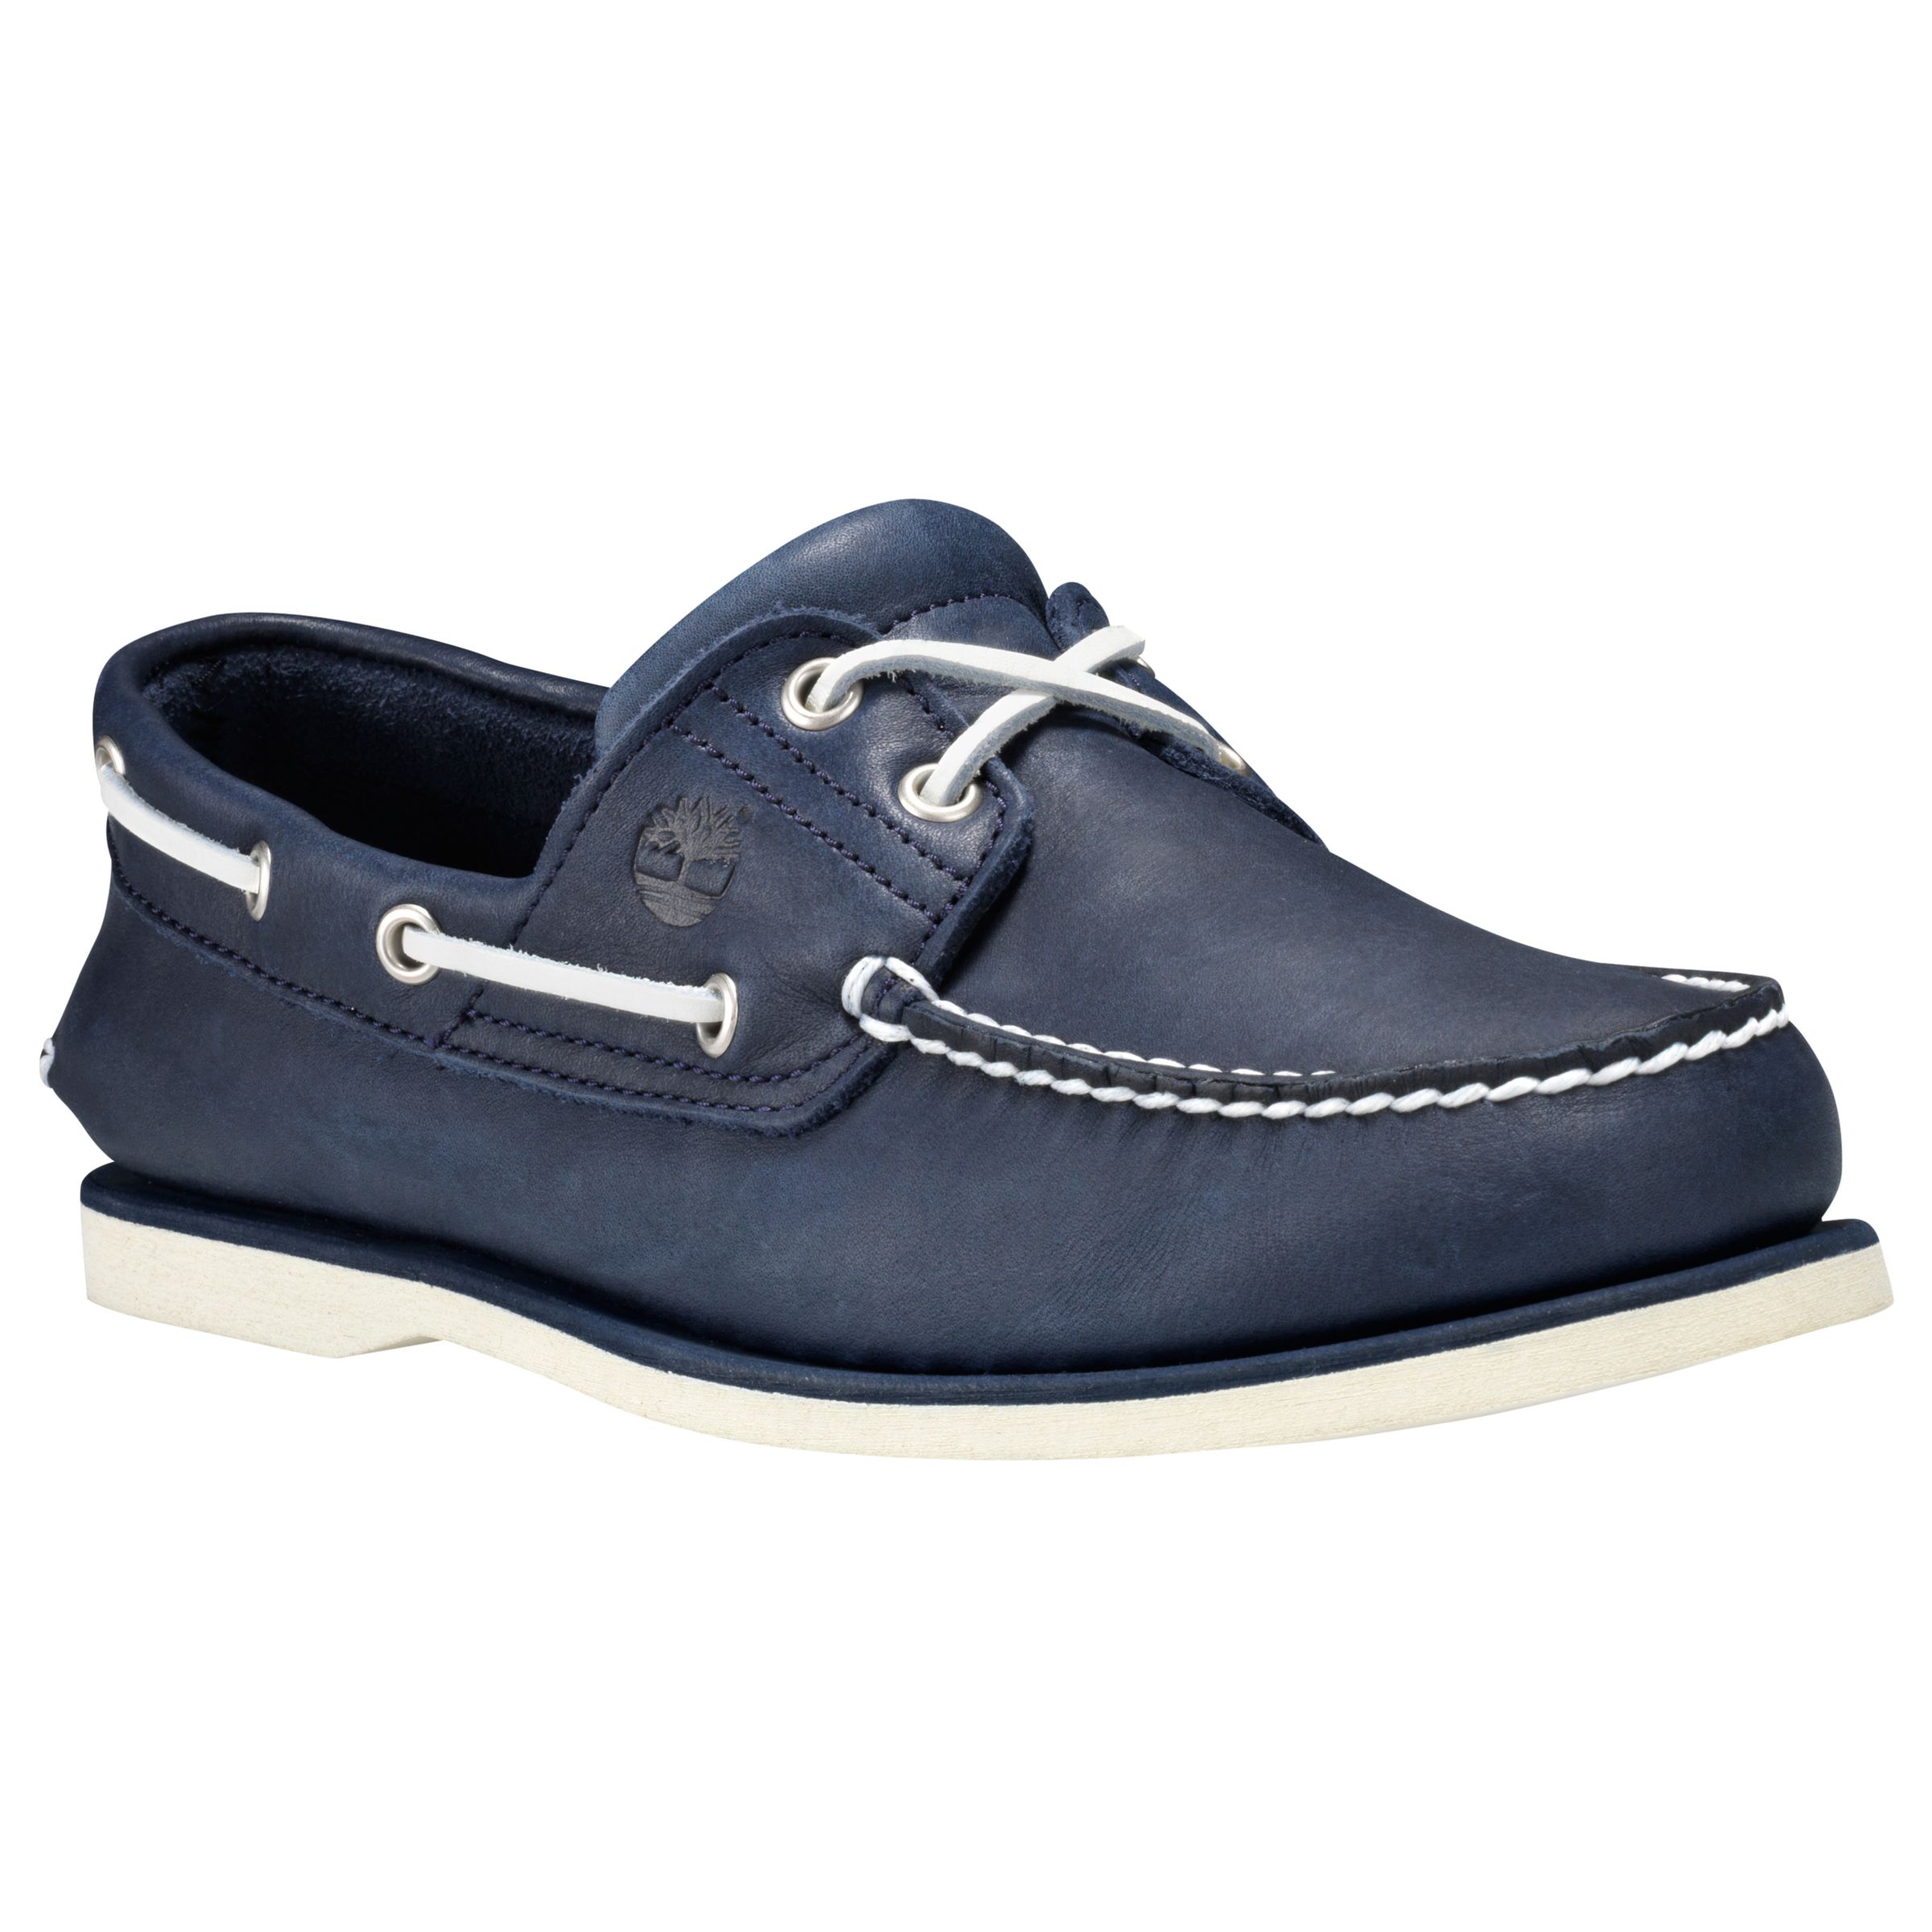 Timberland Nubuck Leather Boat Shoes 